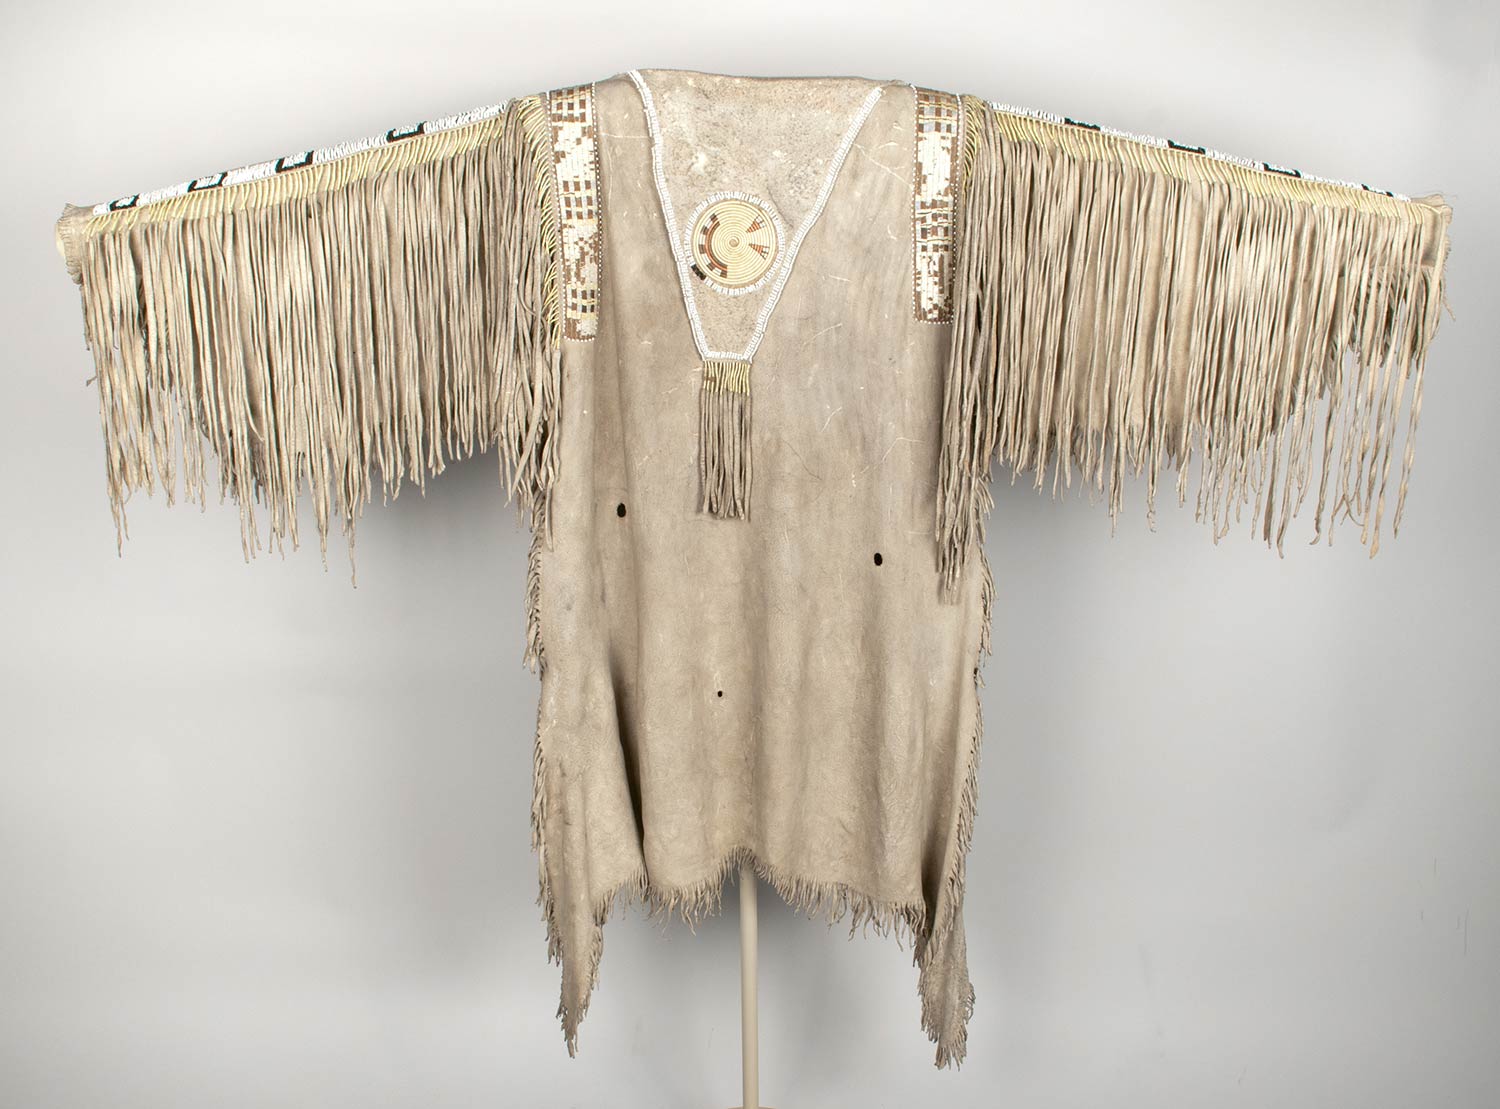 Man's cured hide shirt decorated with quillwork, Venetian glass beads, wool cloth, and fringe. Body of the shirt is of the two-skin style with hair side outward and head section at top.